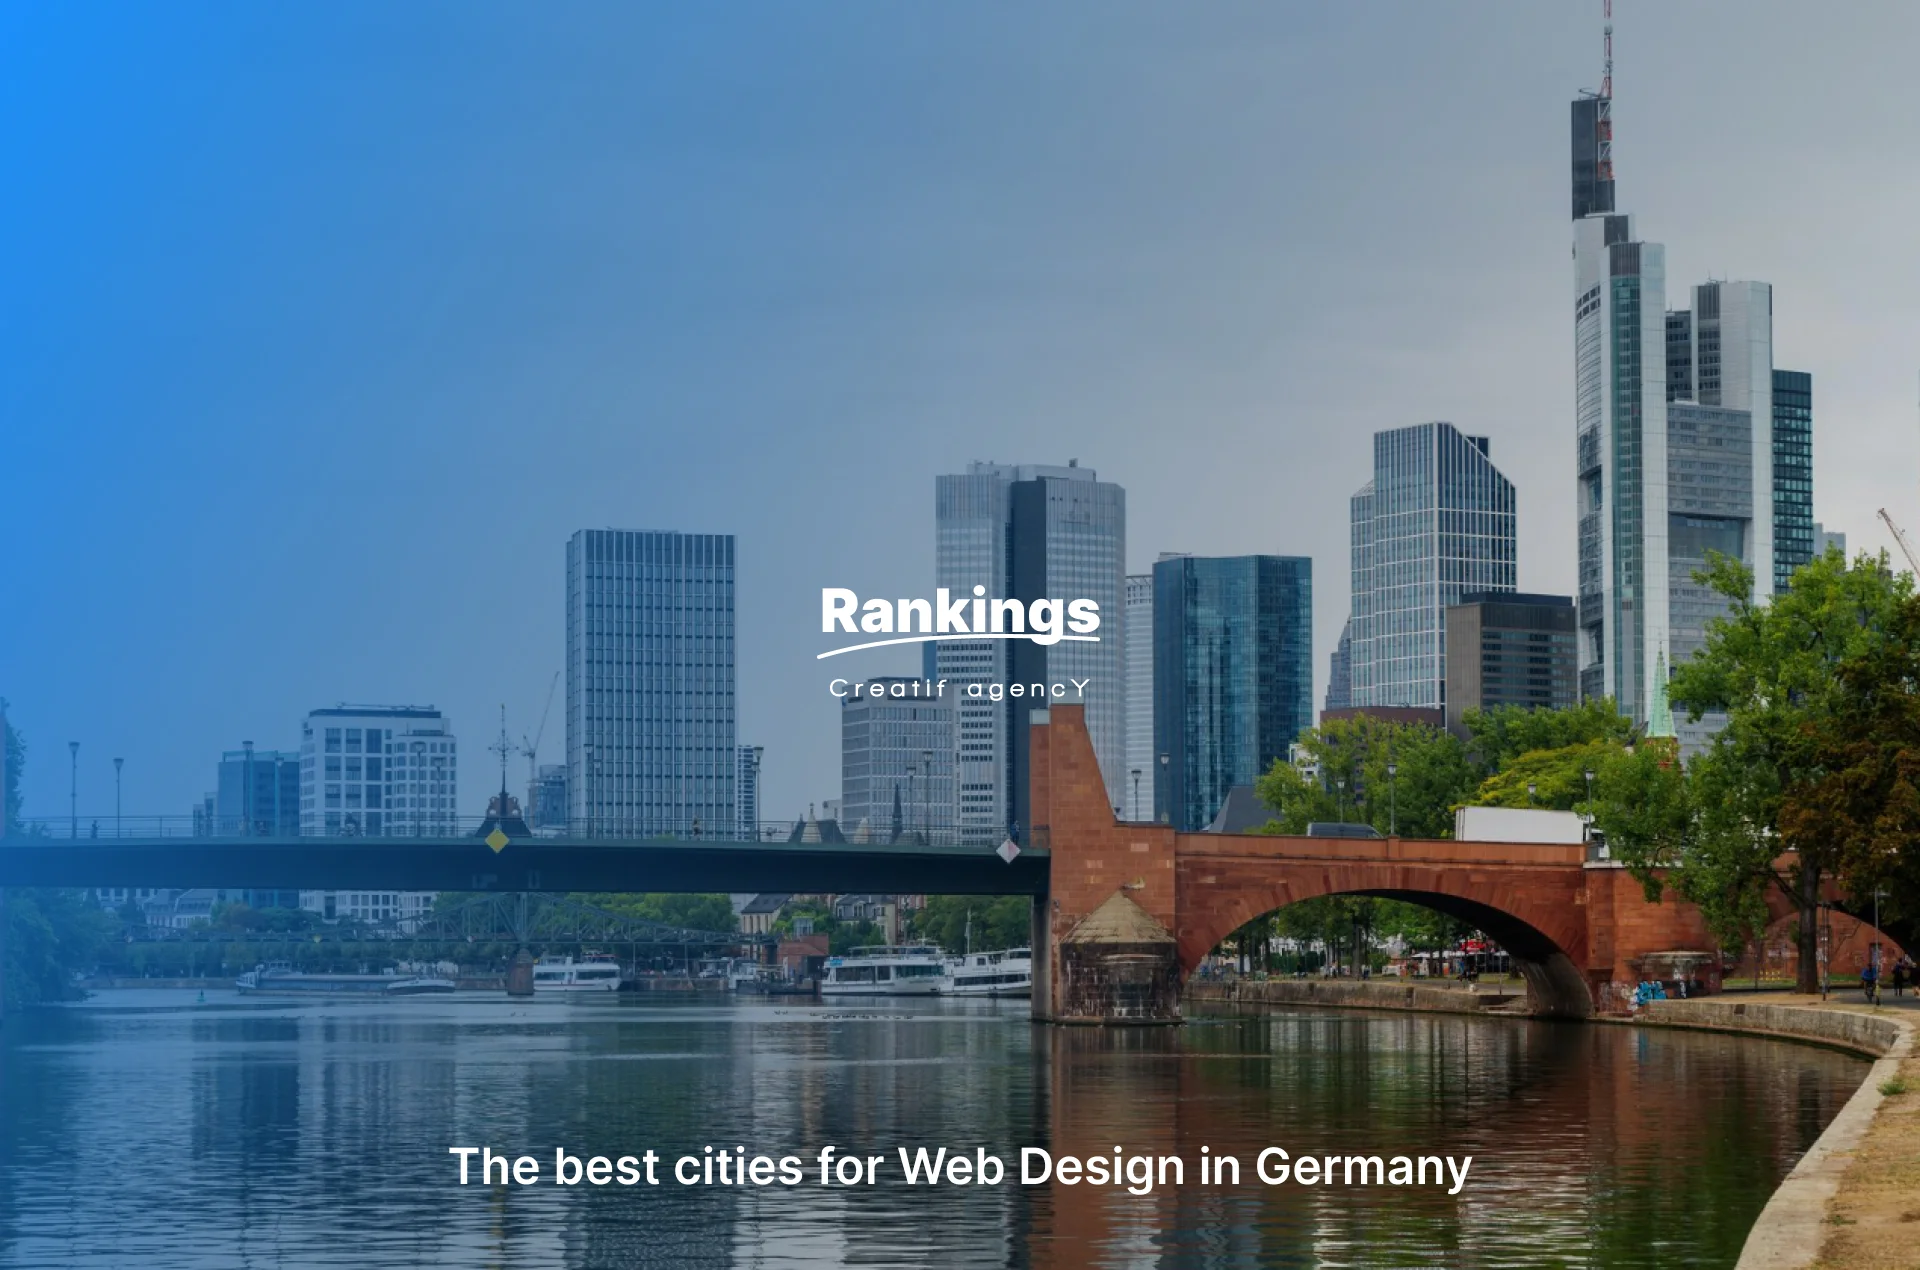 The best cities for Web Design in Germany